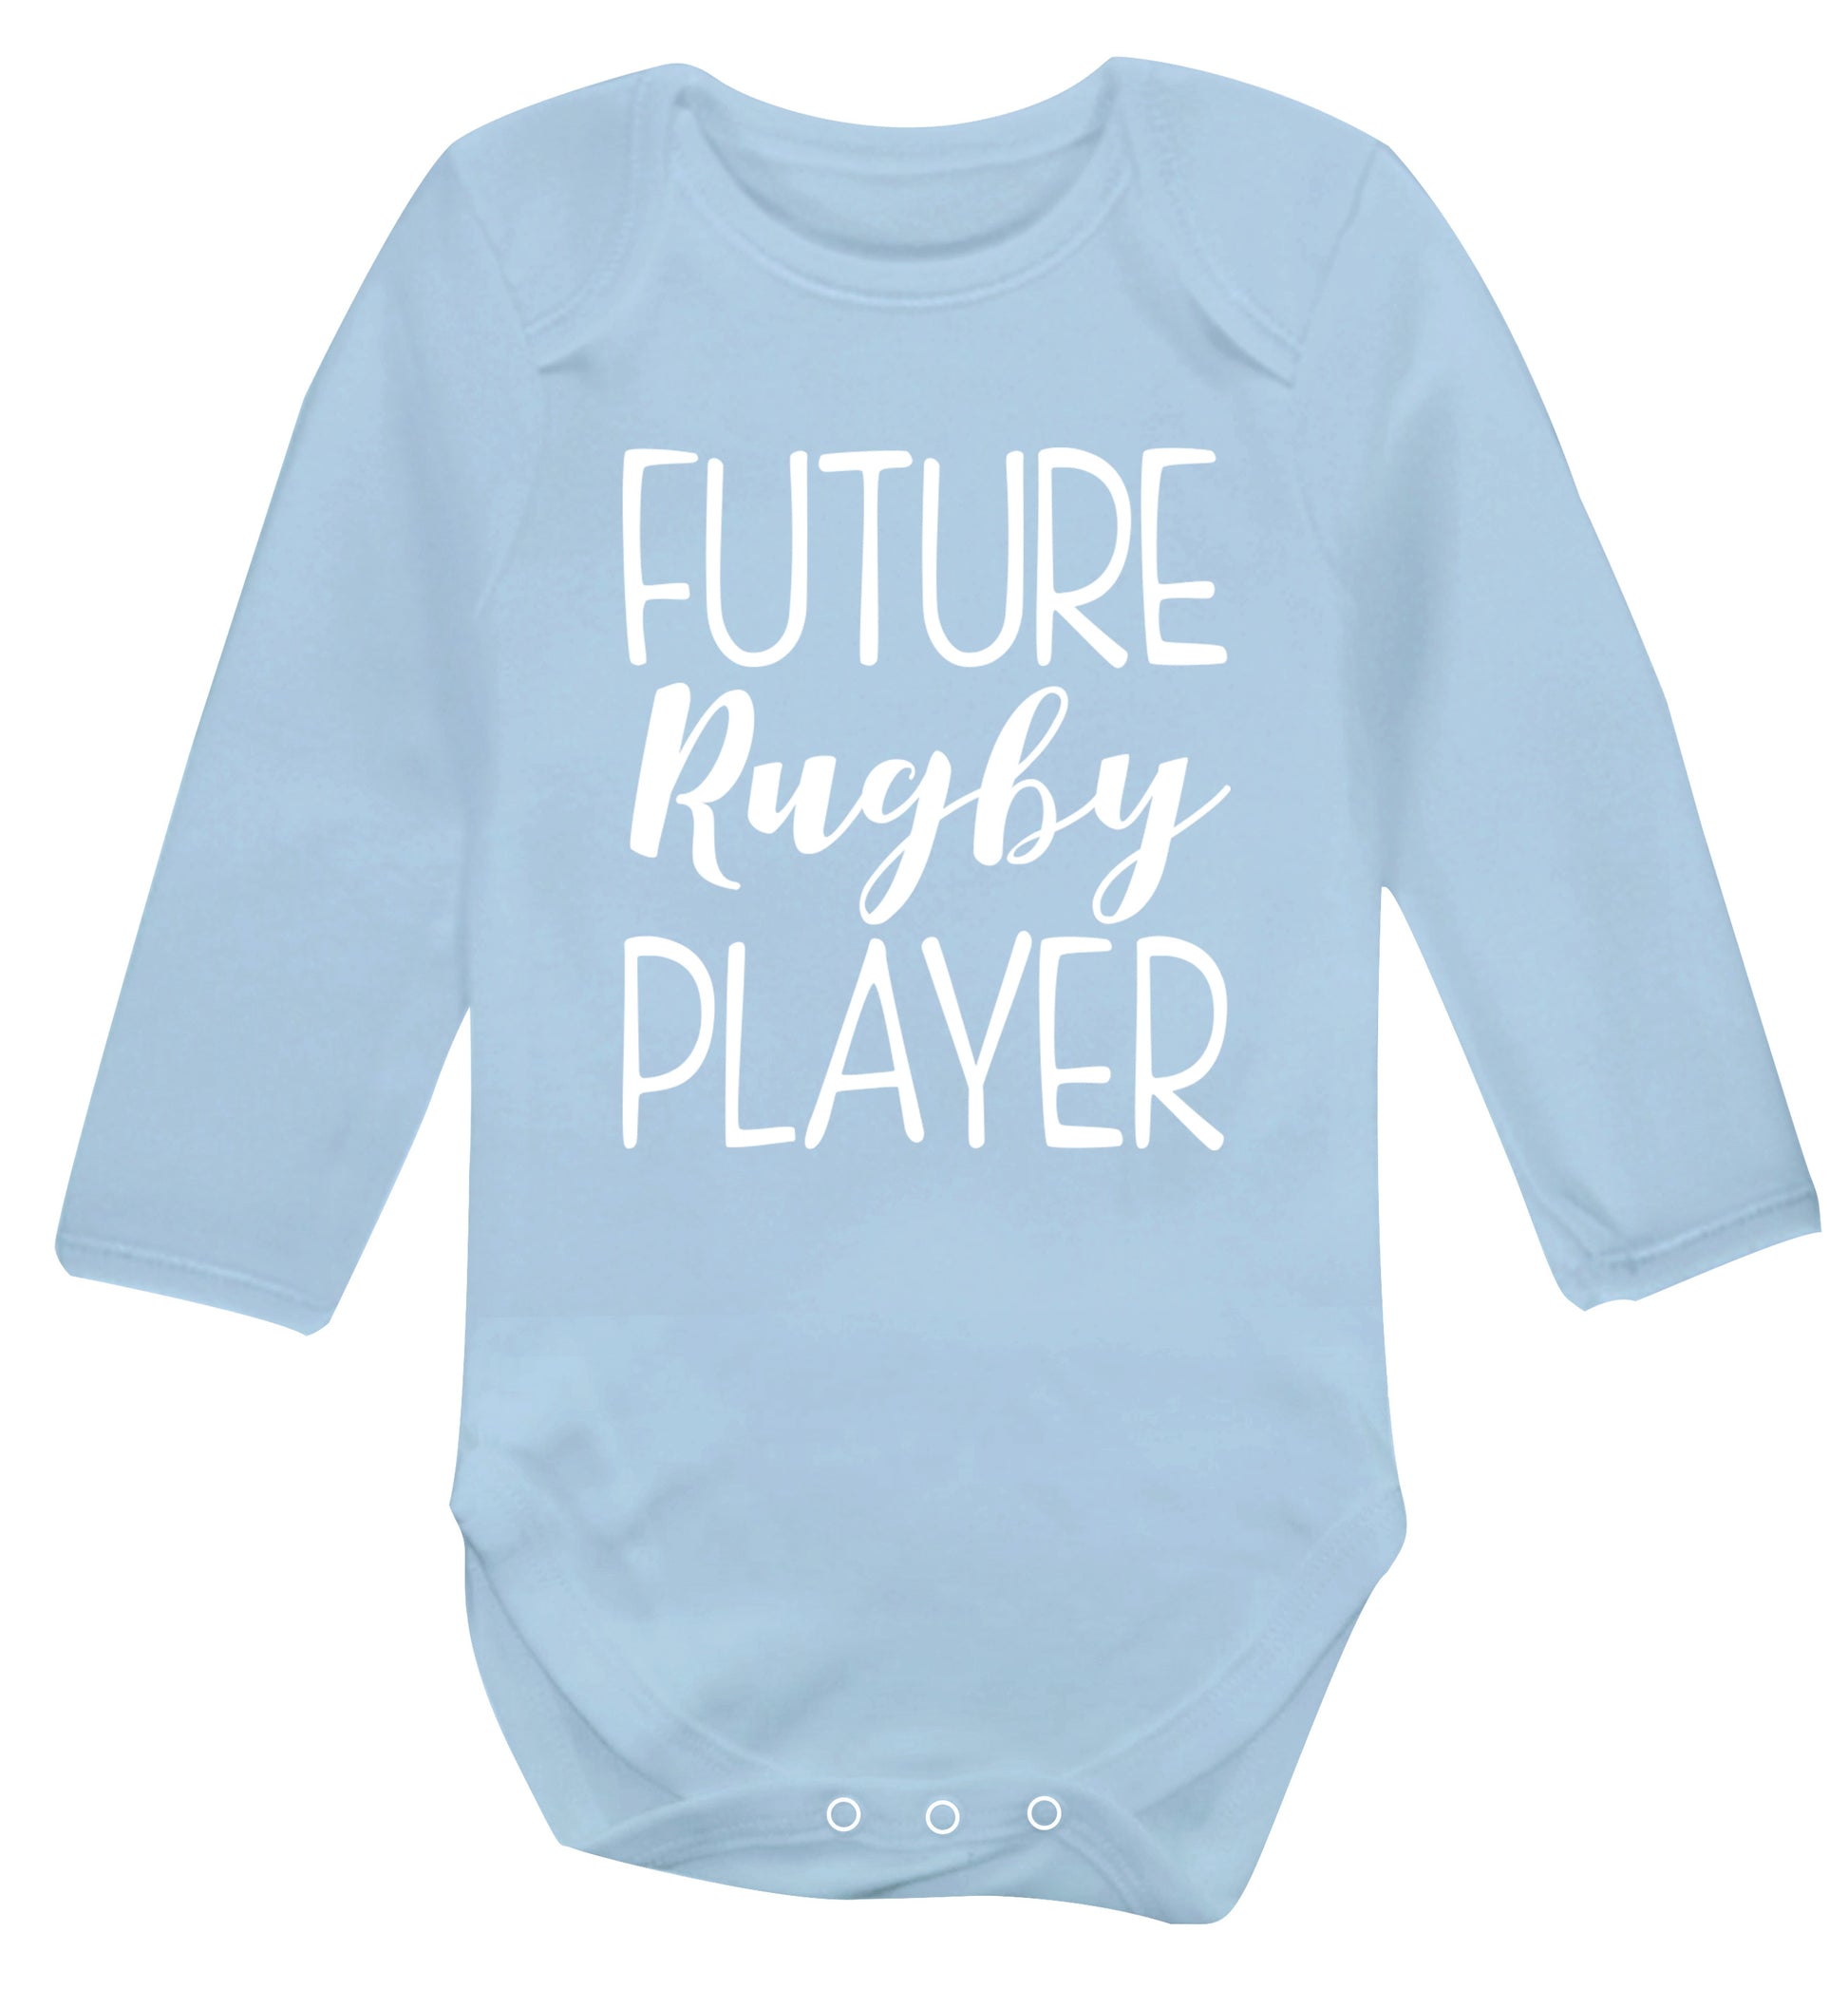 Future rugby player Baby Vest long sleeved pale blue 6-12 months